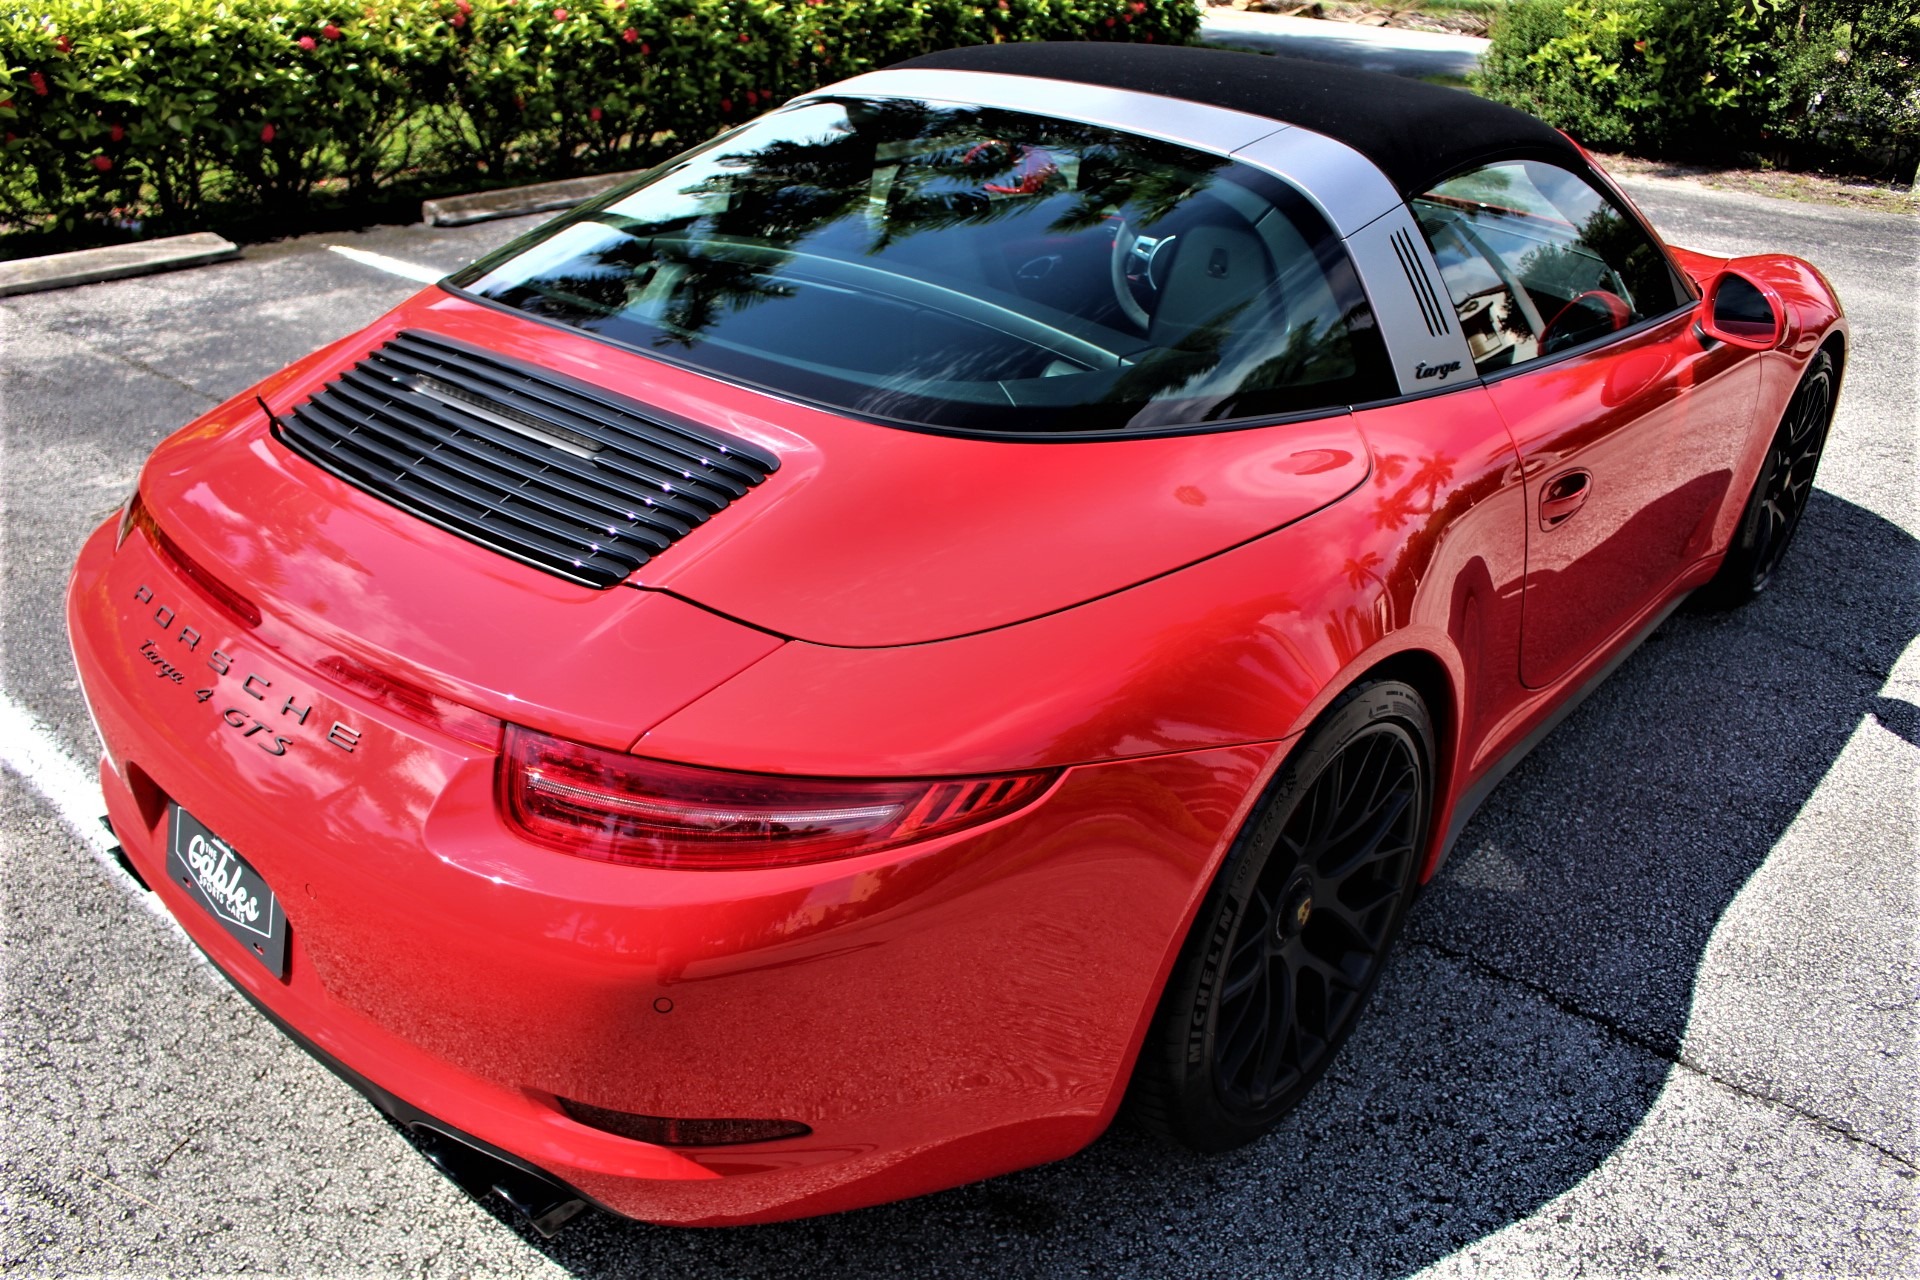 Used 2016 Porsche 911 Targa 4 GTS for sale Sold at The Gables Sports Cars in Miami FL 33146 2